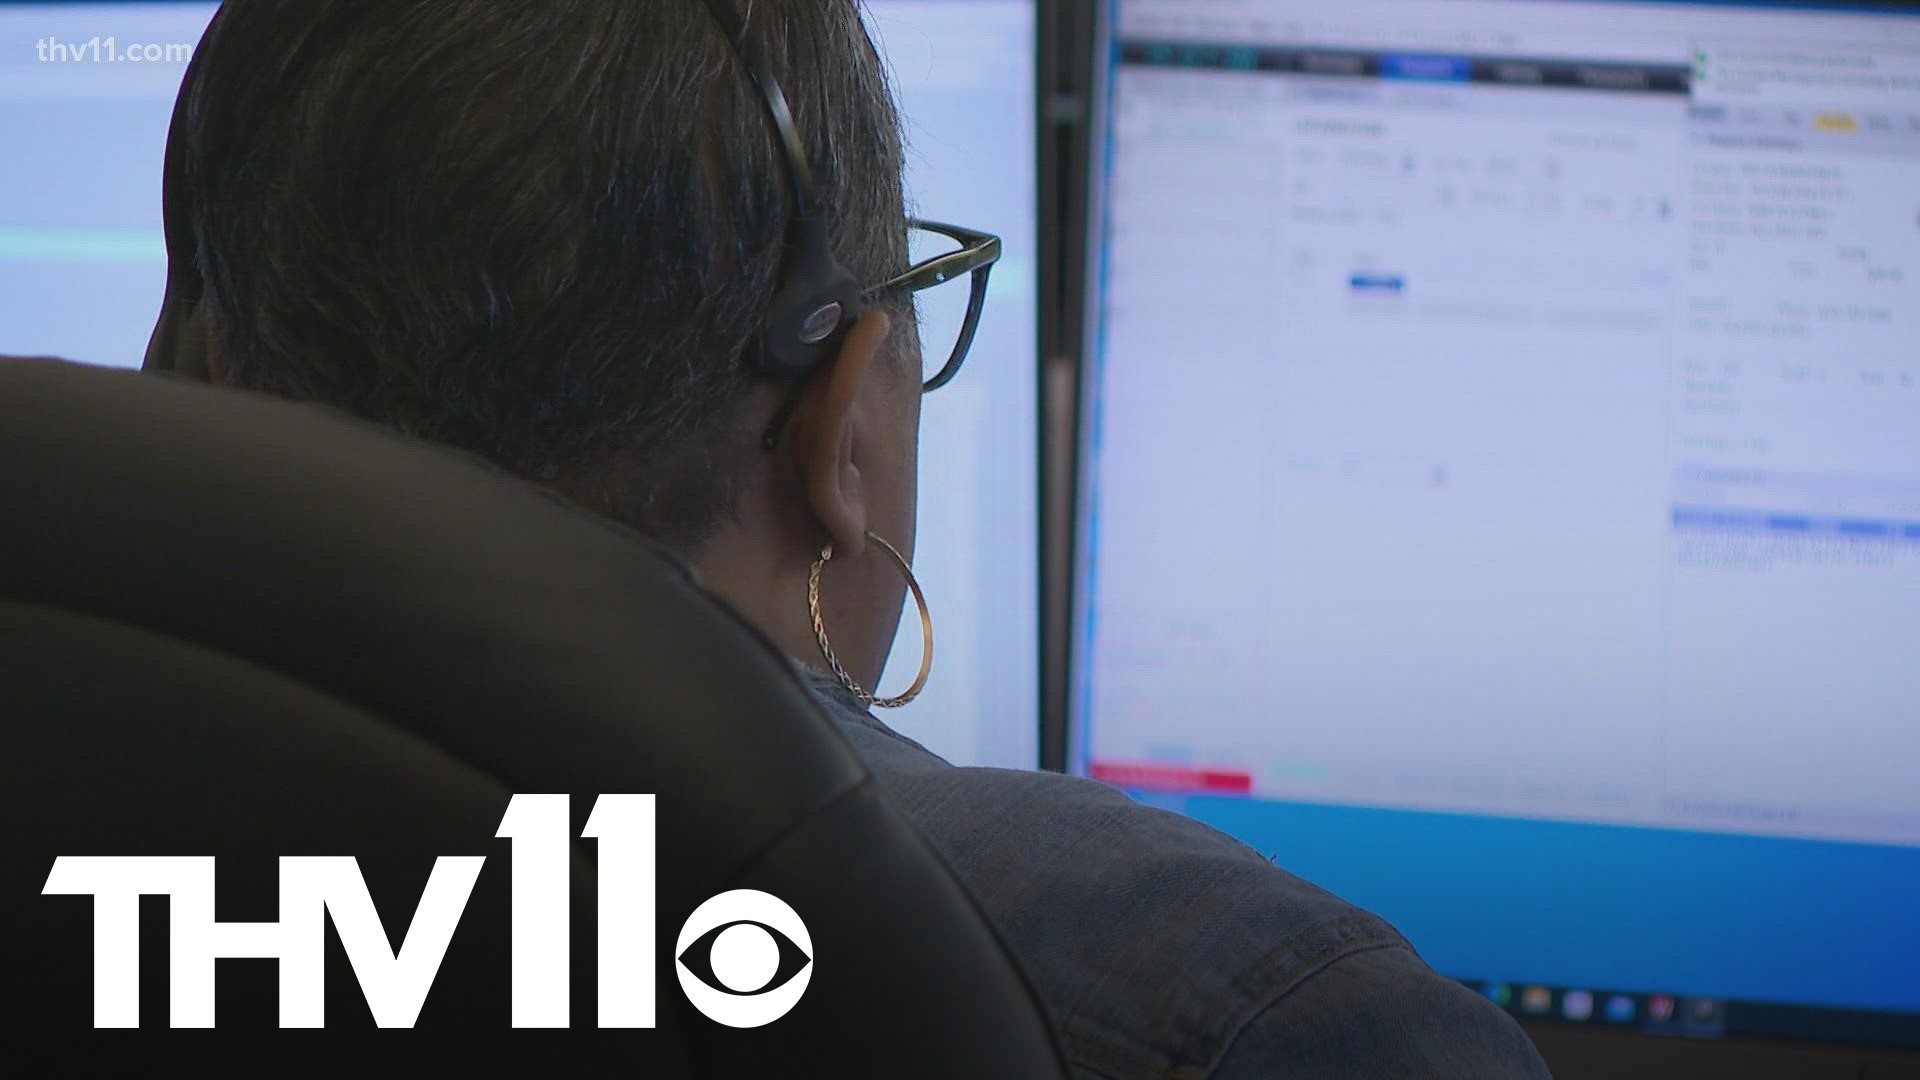 We've already mentioned the dispatcher shortage in Nort Little Rock. Now, we're looking at the Capital city's operations to answer emergency calls more efficiently.